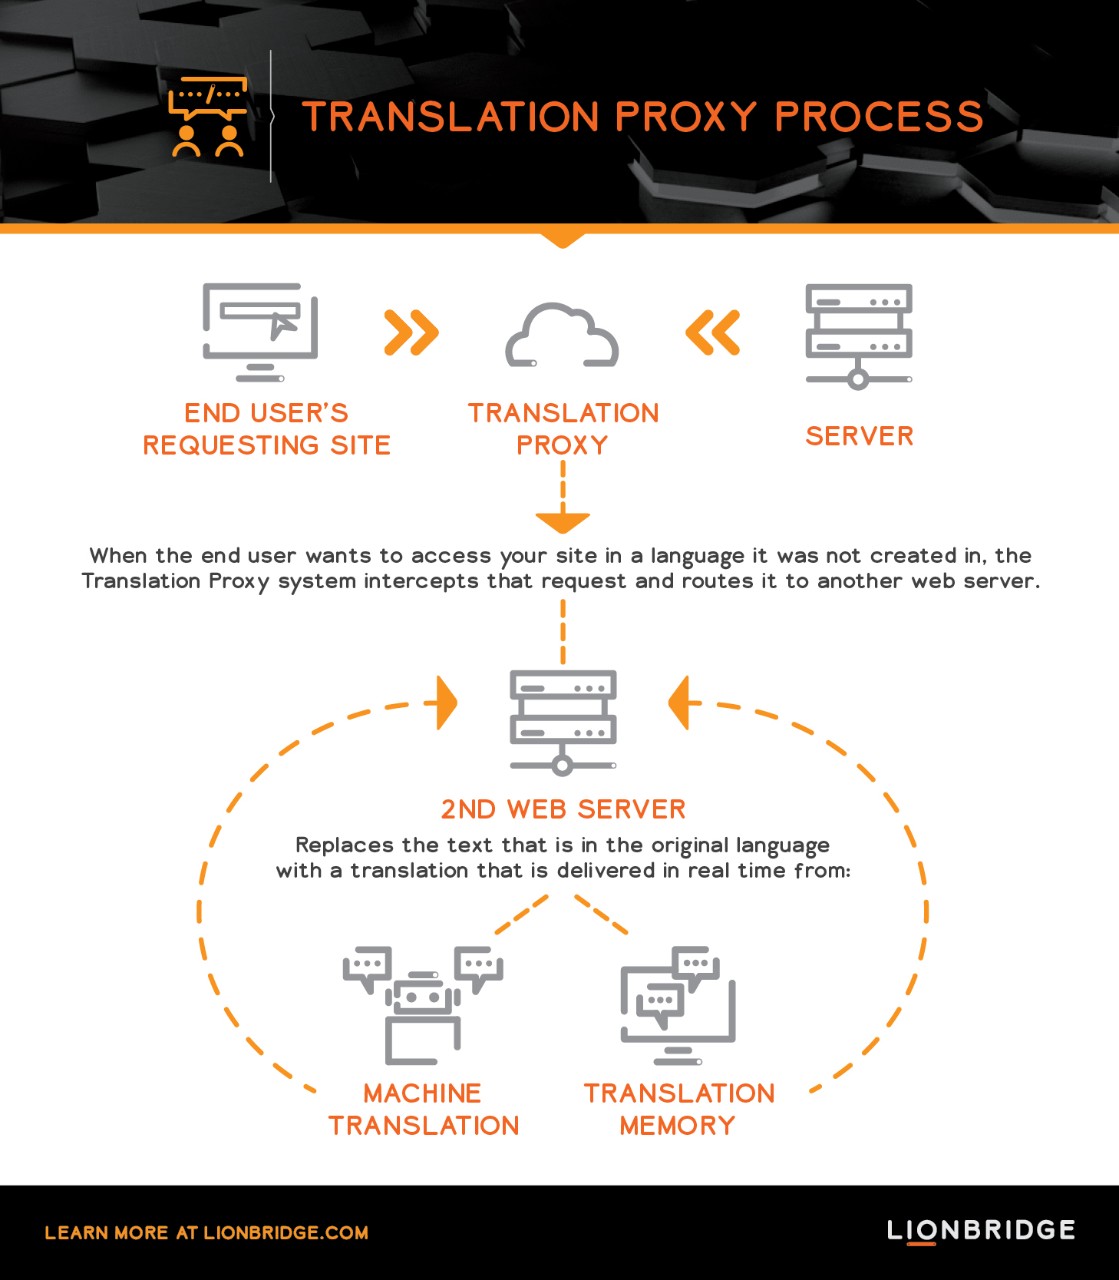 A diagram showing the process a Translation Proxy uses to translate text